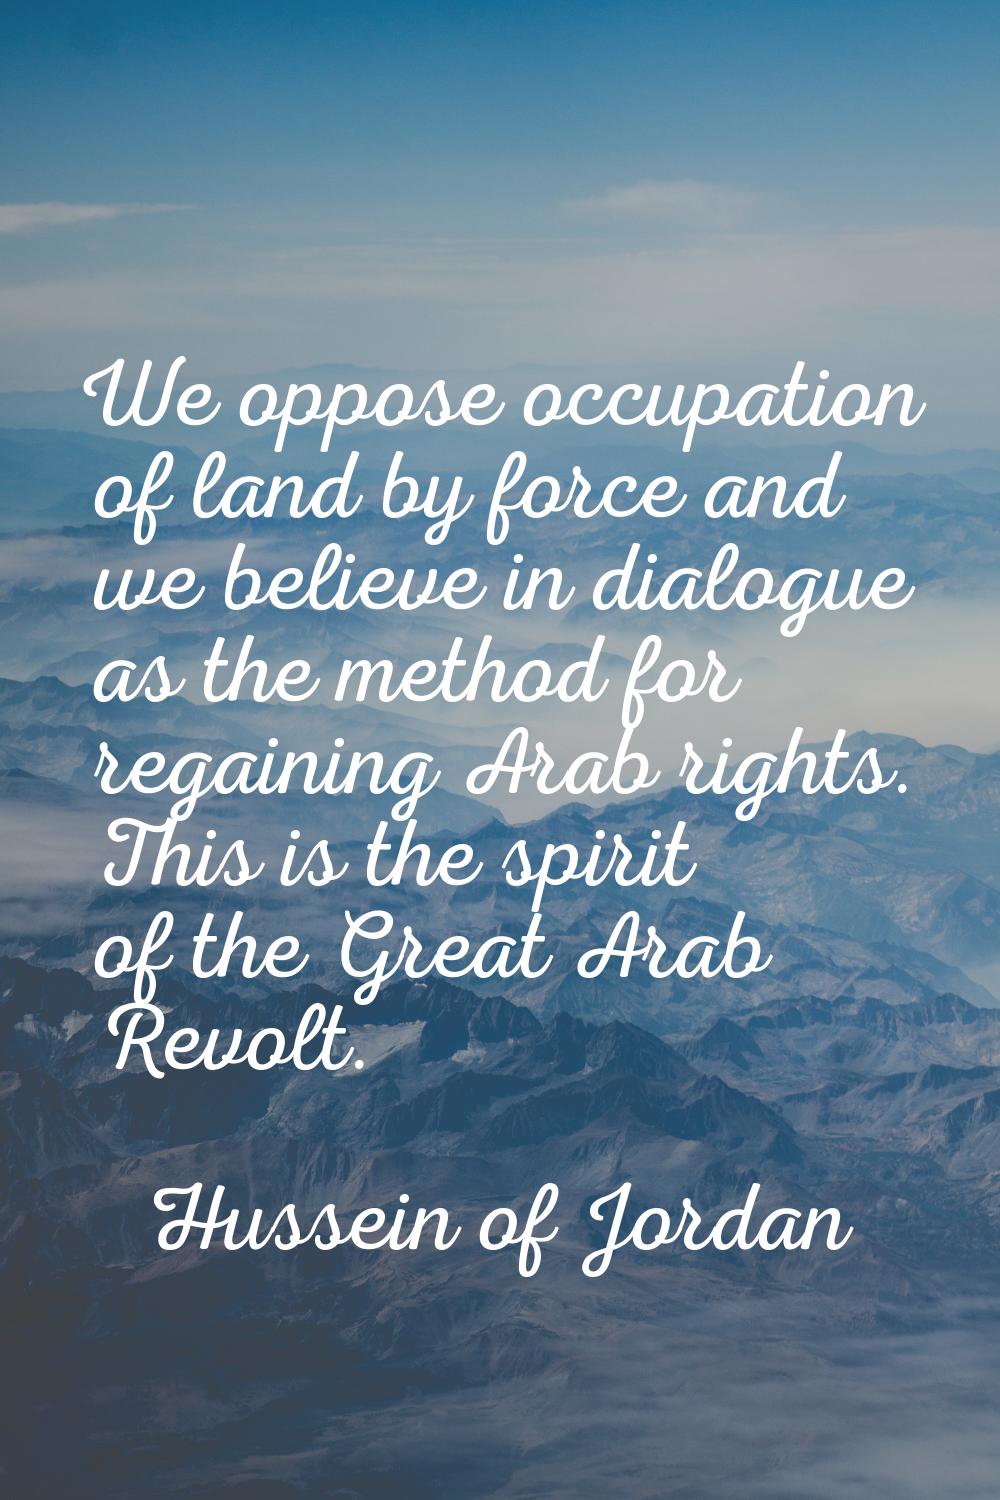 We oppose occupation of land by force and we believe in dialogue as the method for regaining Arab r